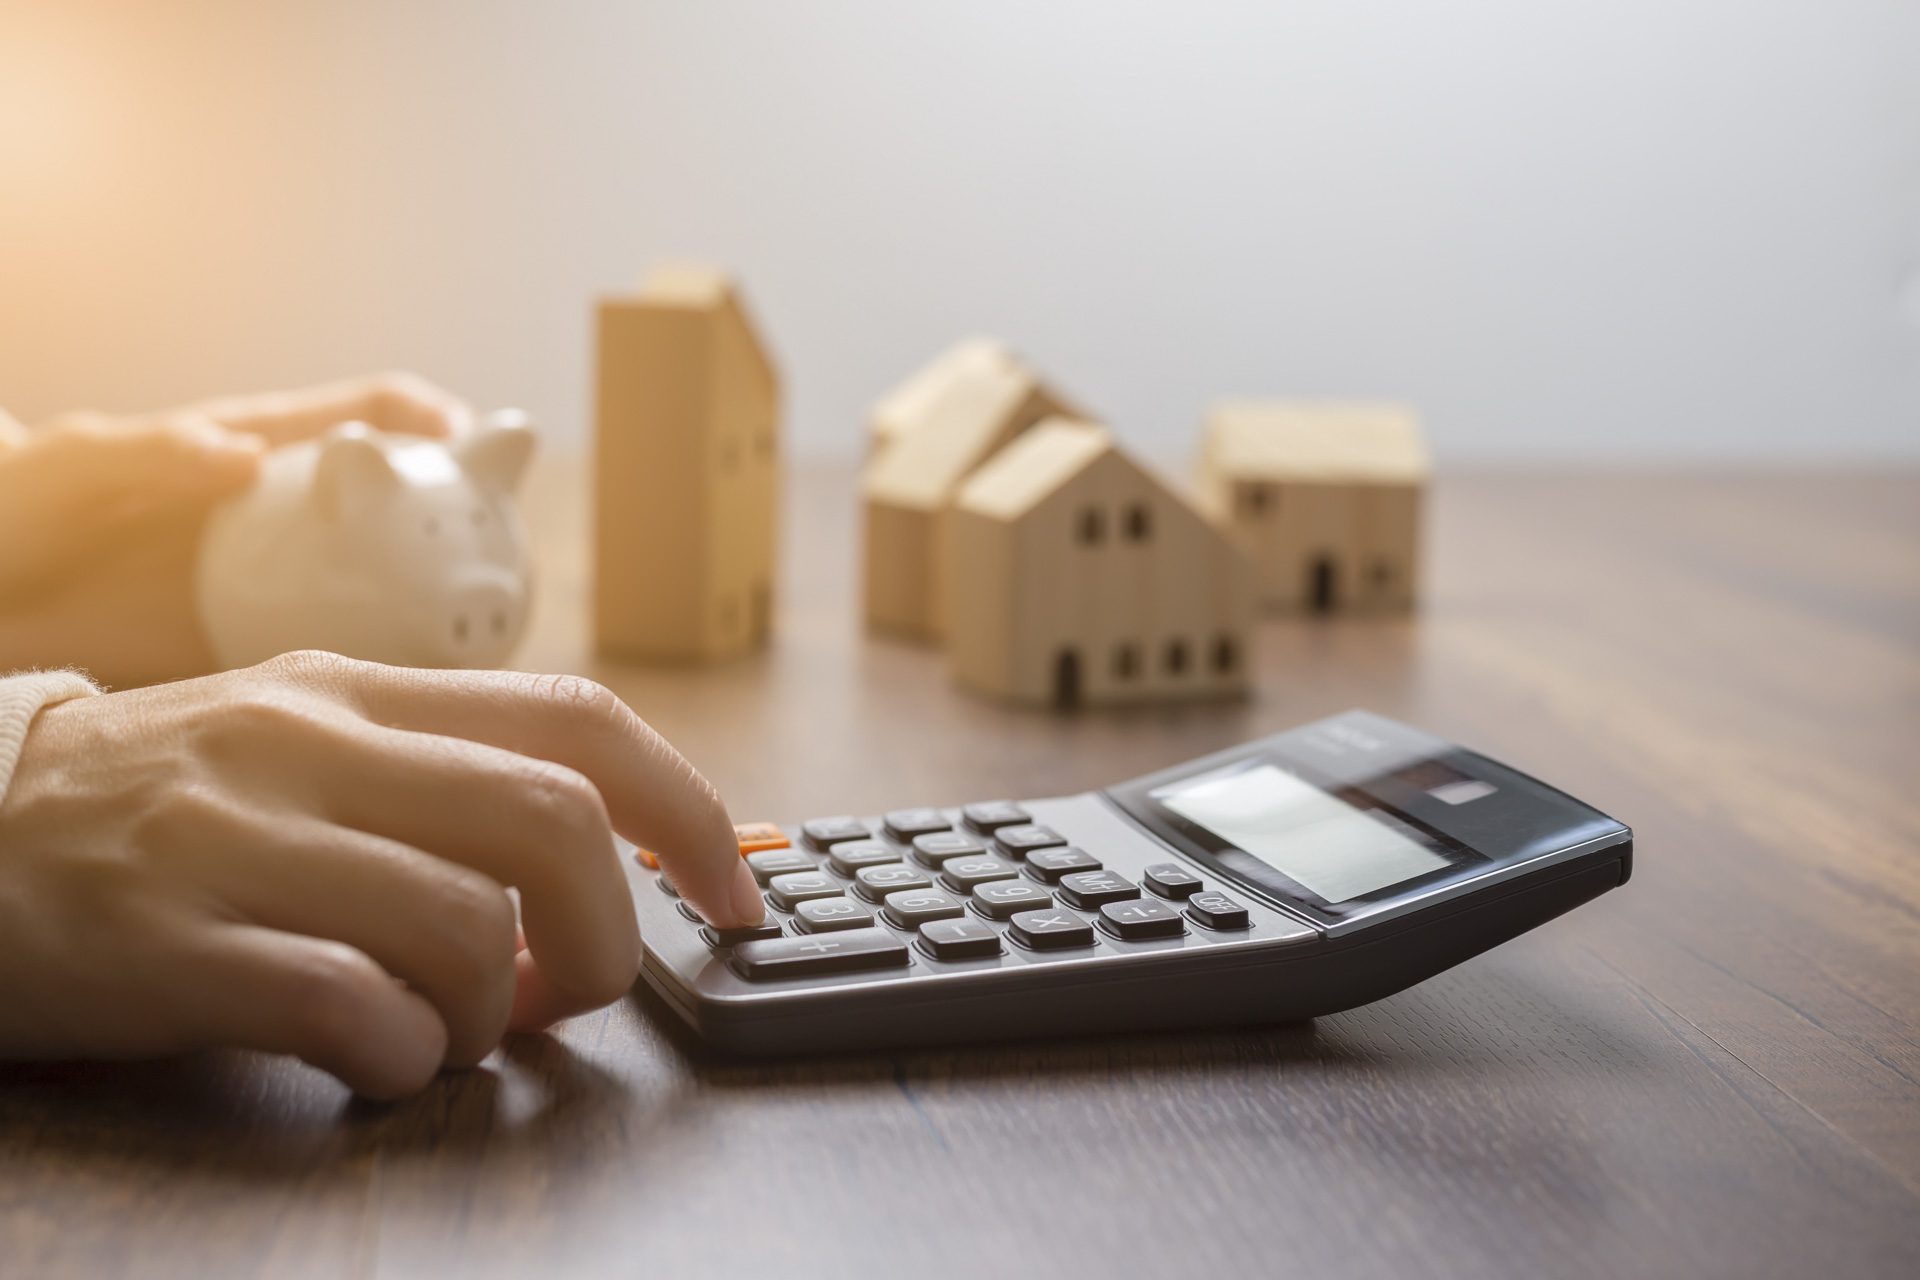 The hand is pressing calculators, piggy bank with wooden house. buy or rent question on note with calculators on desk. Save money and buy house concept.